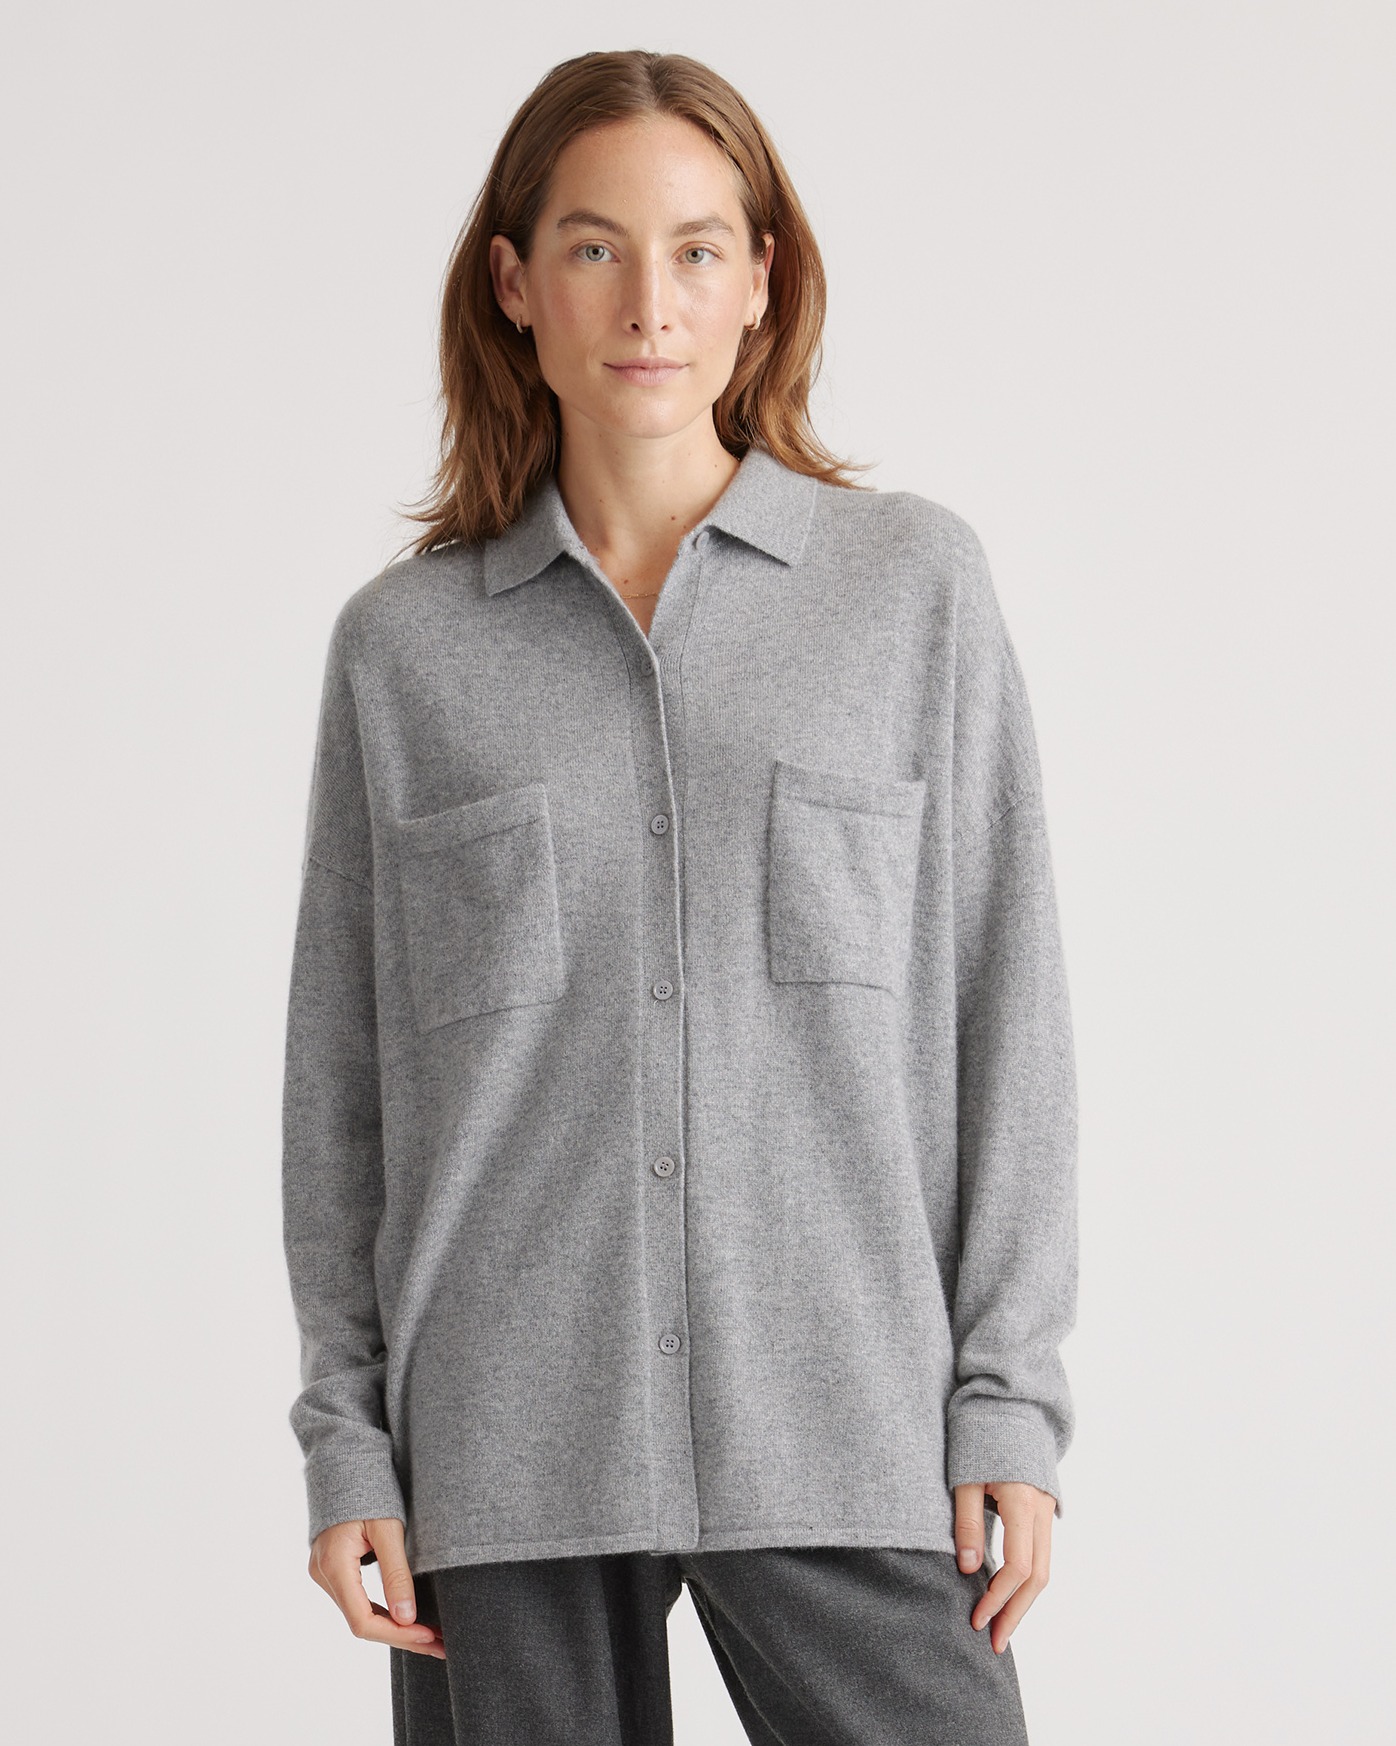 Women's Cashmere Loungewear  Sale Up To 70% Off At THE OUTNET